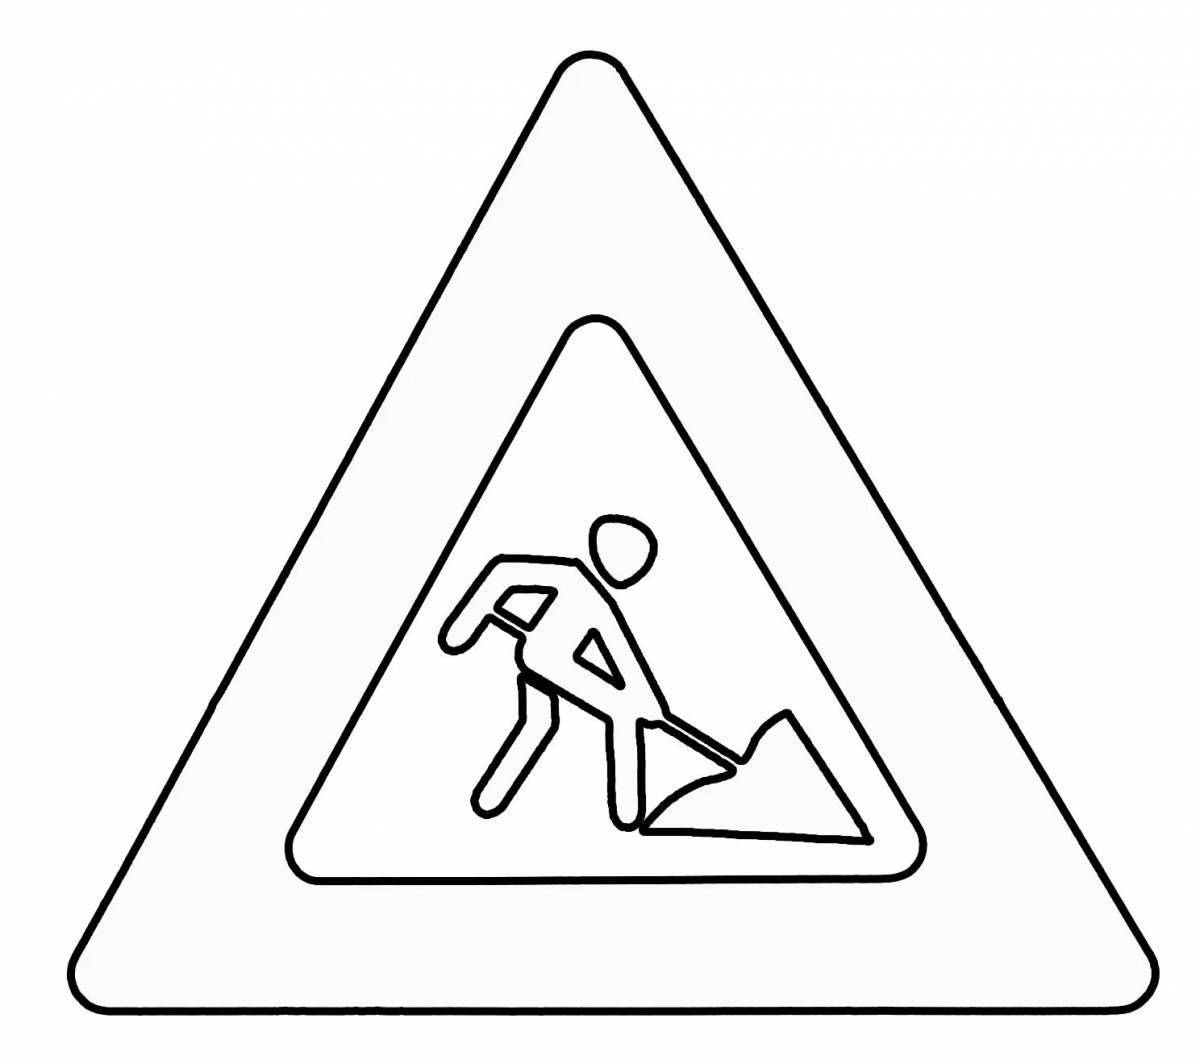 Regal traffic signs coloring page